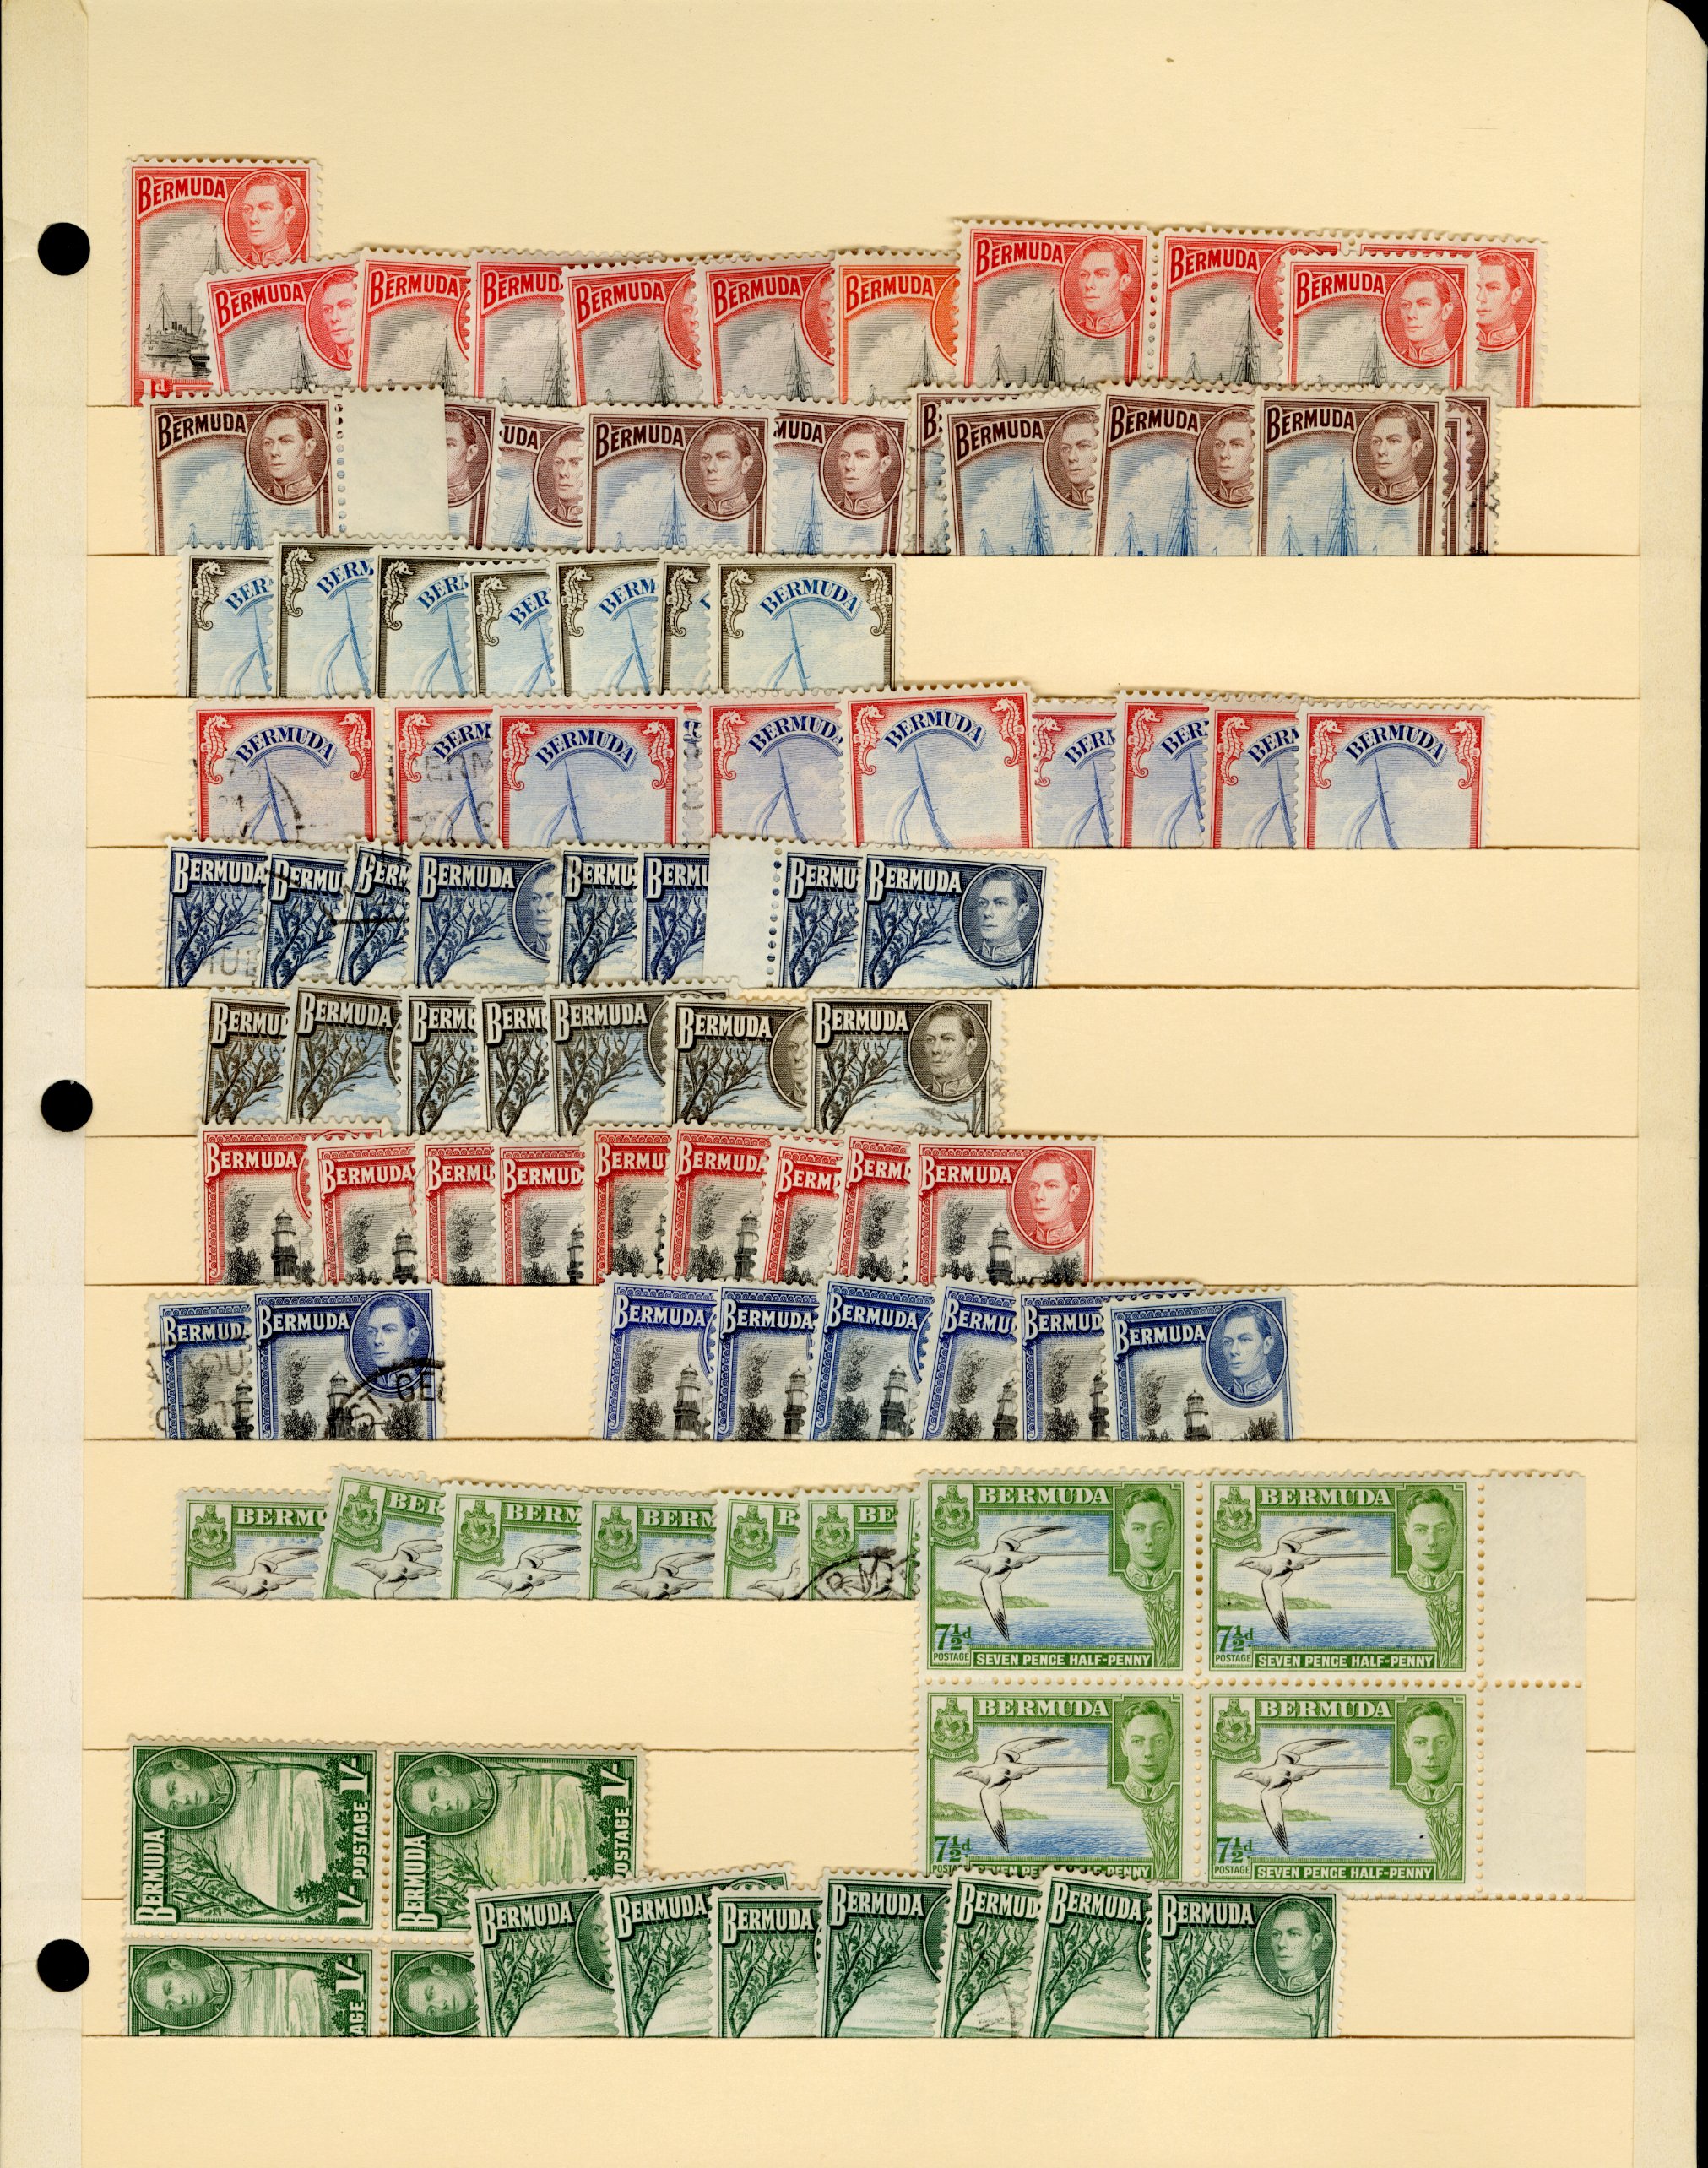 Lot 1415 - LARGE LOTS AND COLLECTIONS GERMANY  -  Cherrystone Auctions U.S. & Worldwide Stamps & Postal History